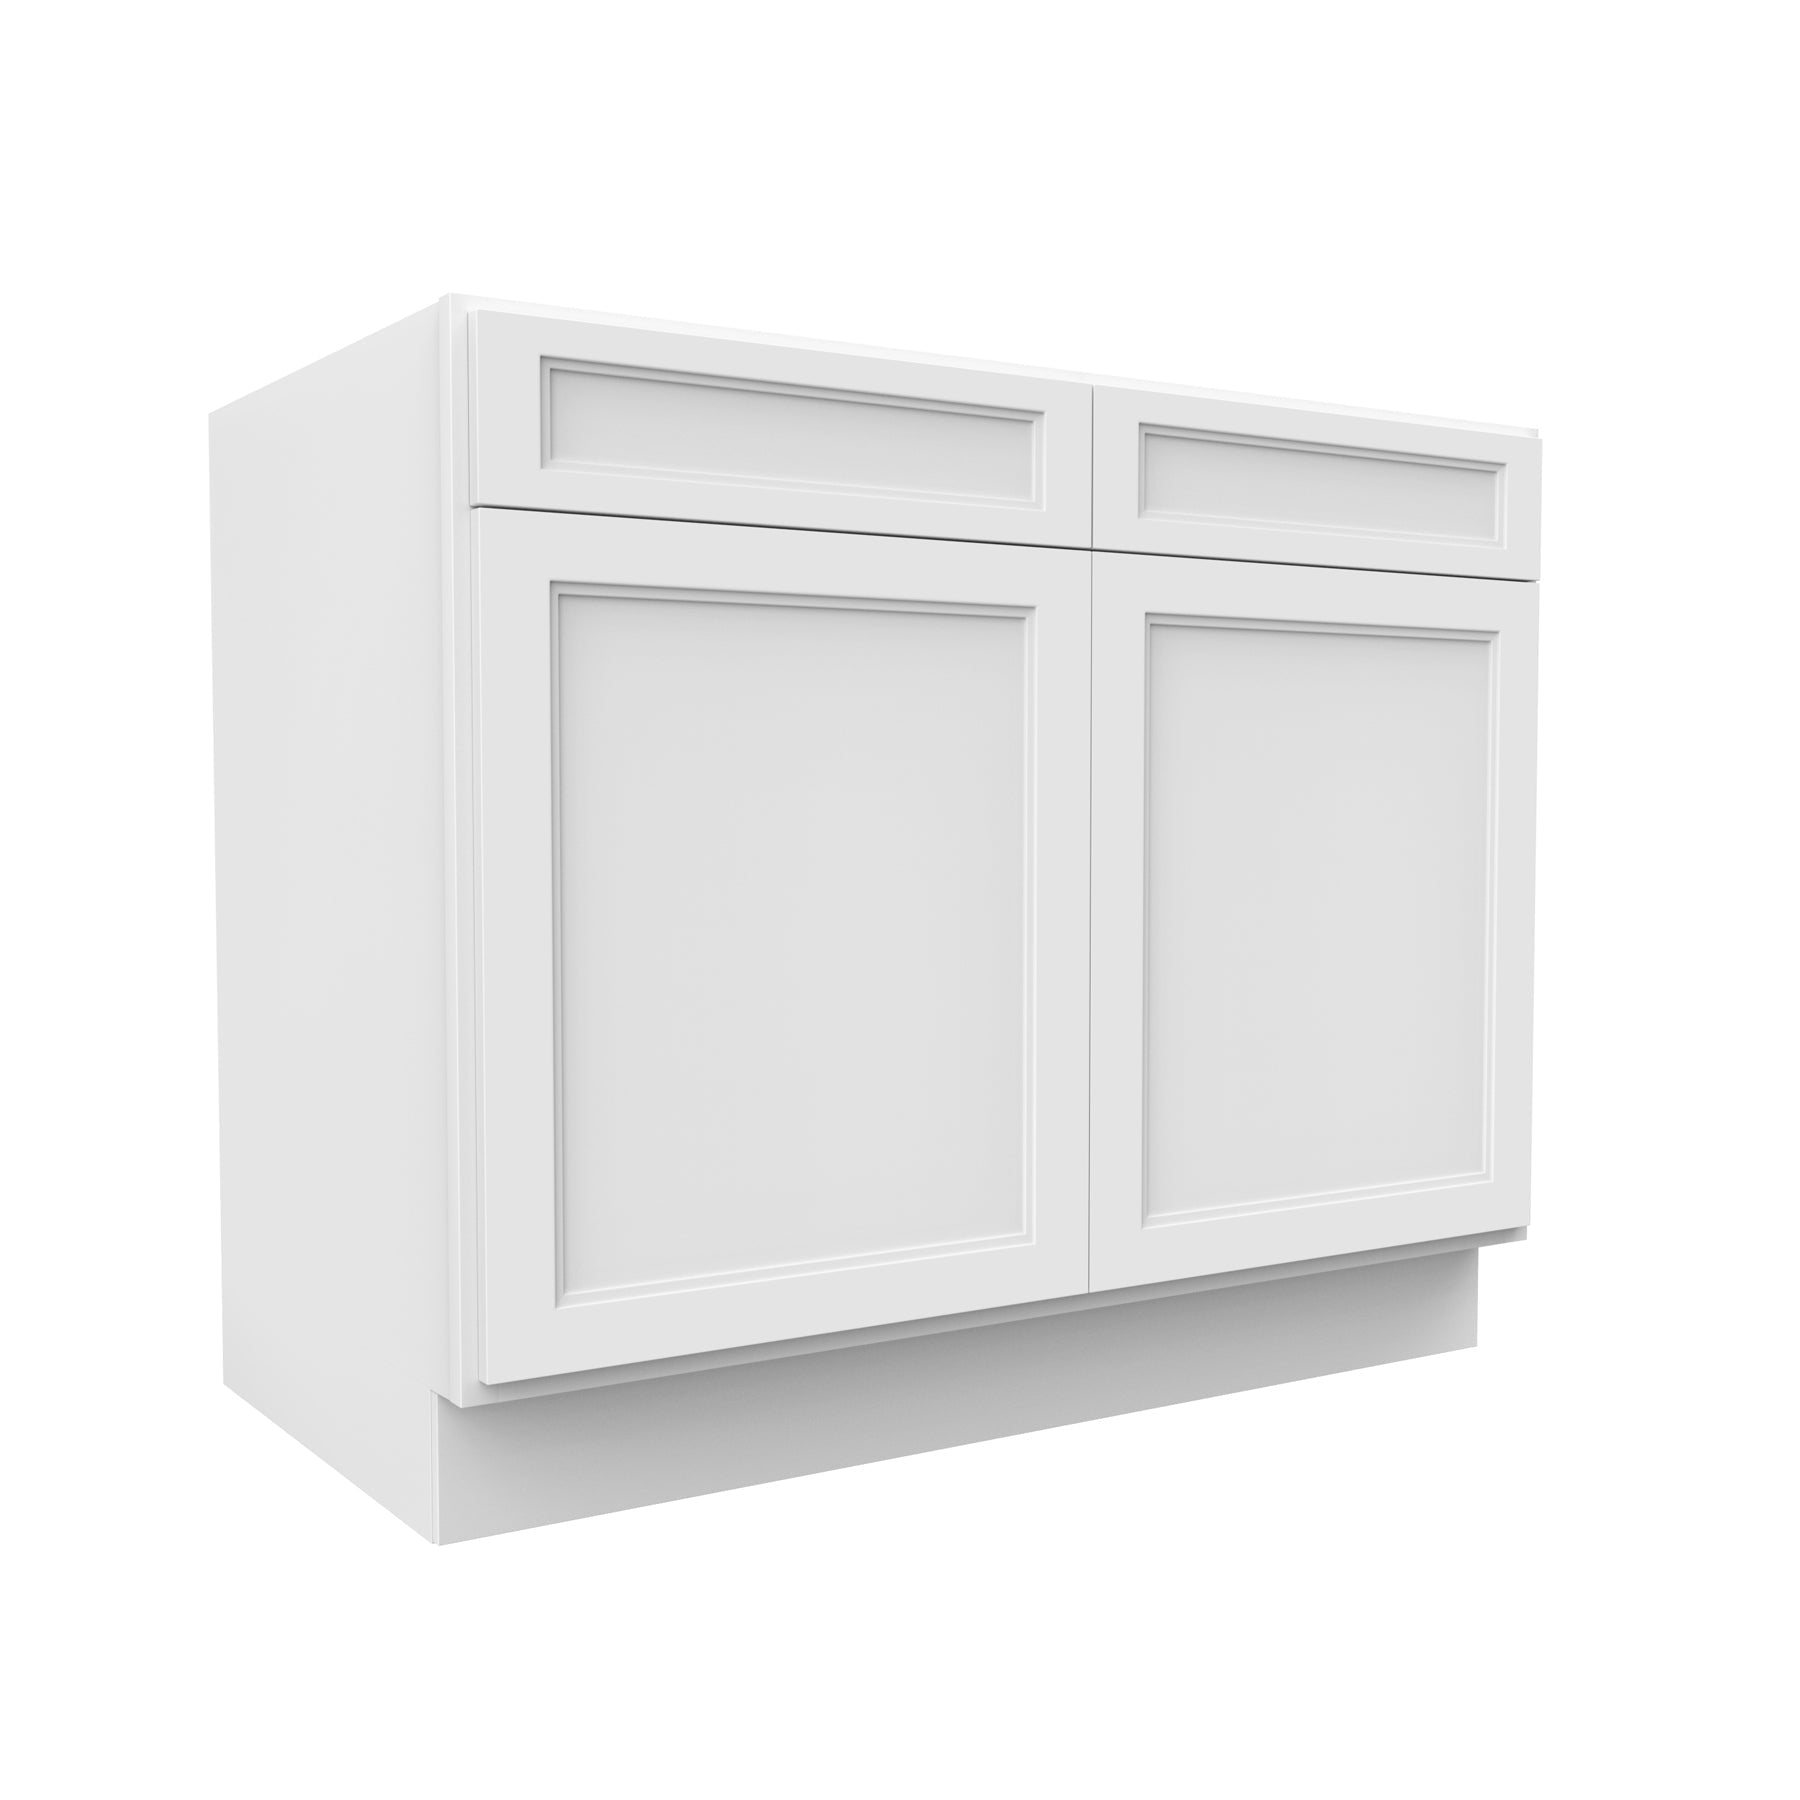 RTA - Fashion White - Double Drawer Front 2 Door Sink Base Cabinet | 42"W x 34.5"H x 24"D